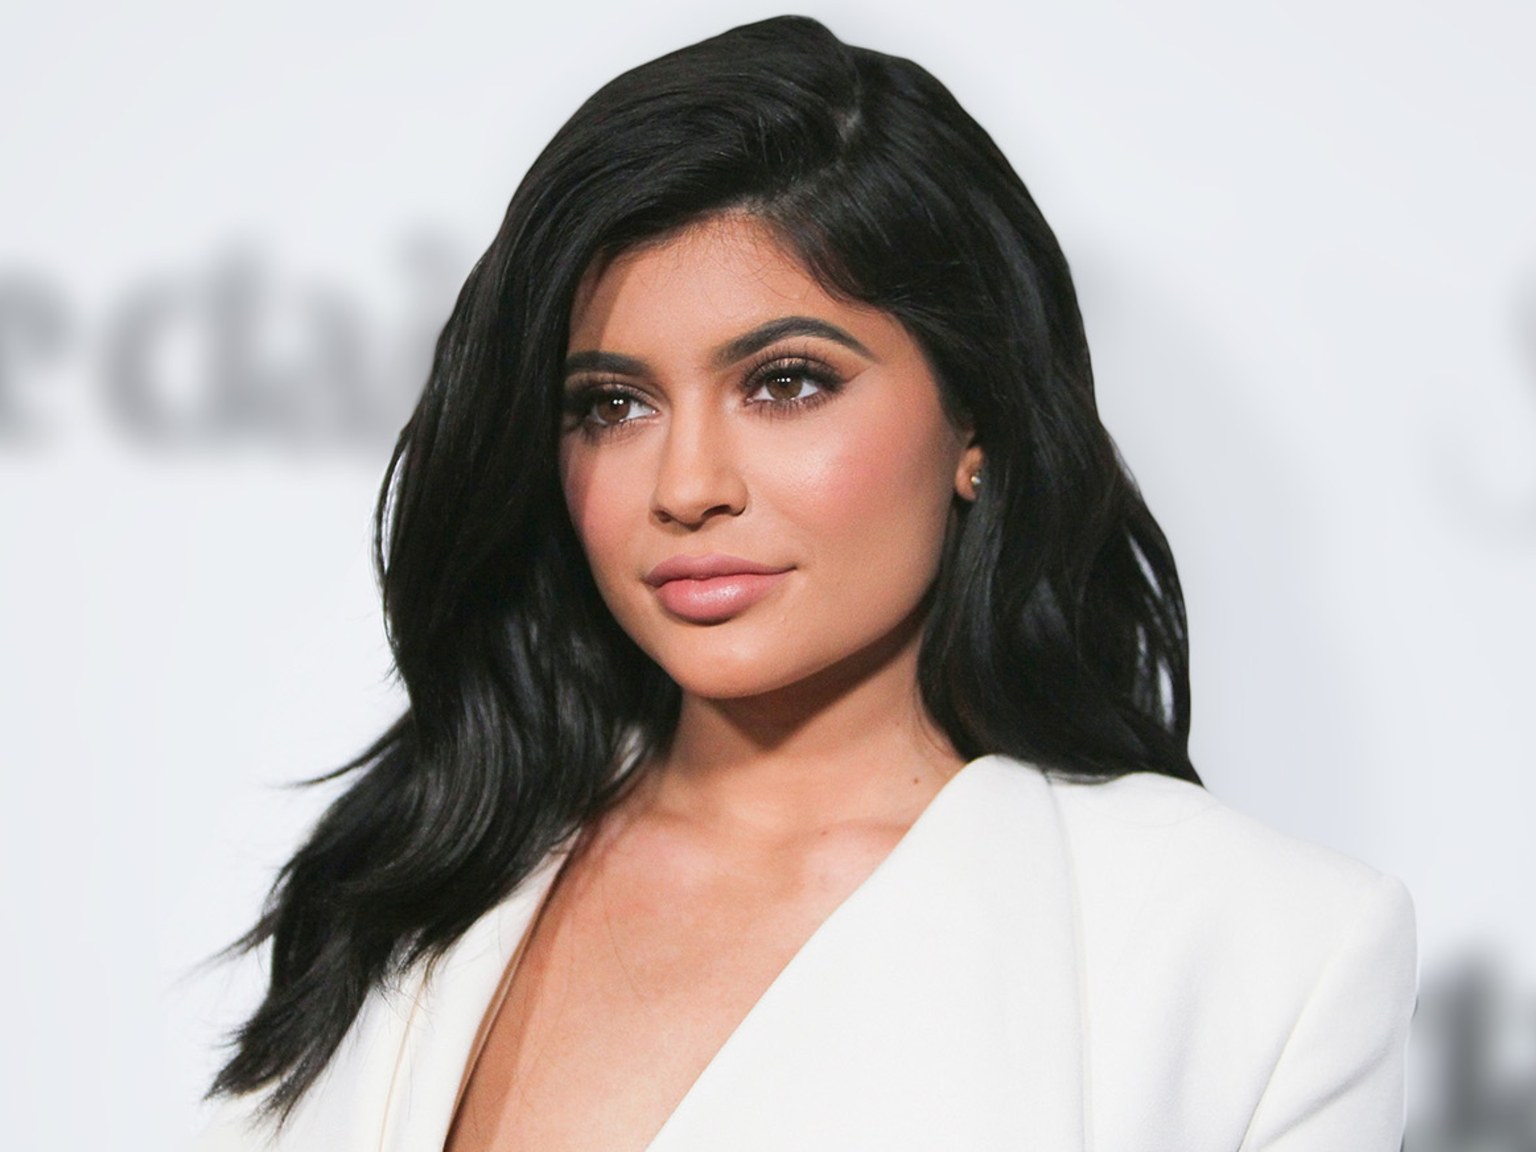 Kylie Jenner Shows Off Her Perfectly Toned Post-Pregnancy Bikini Body